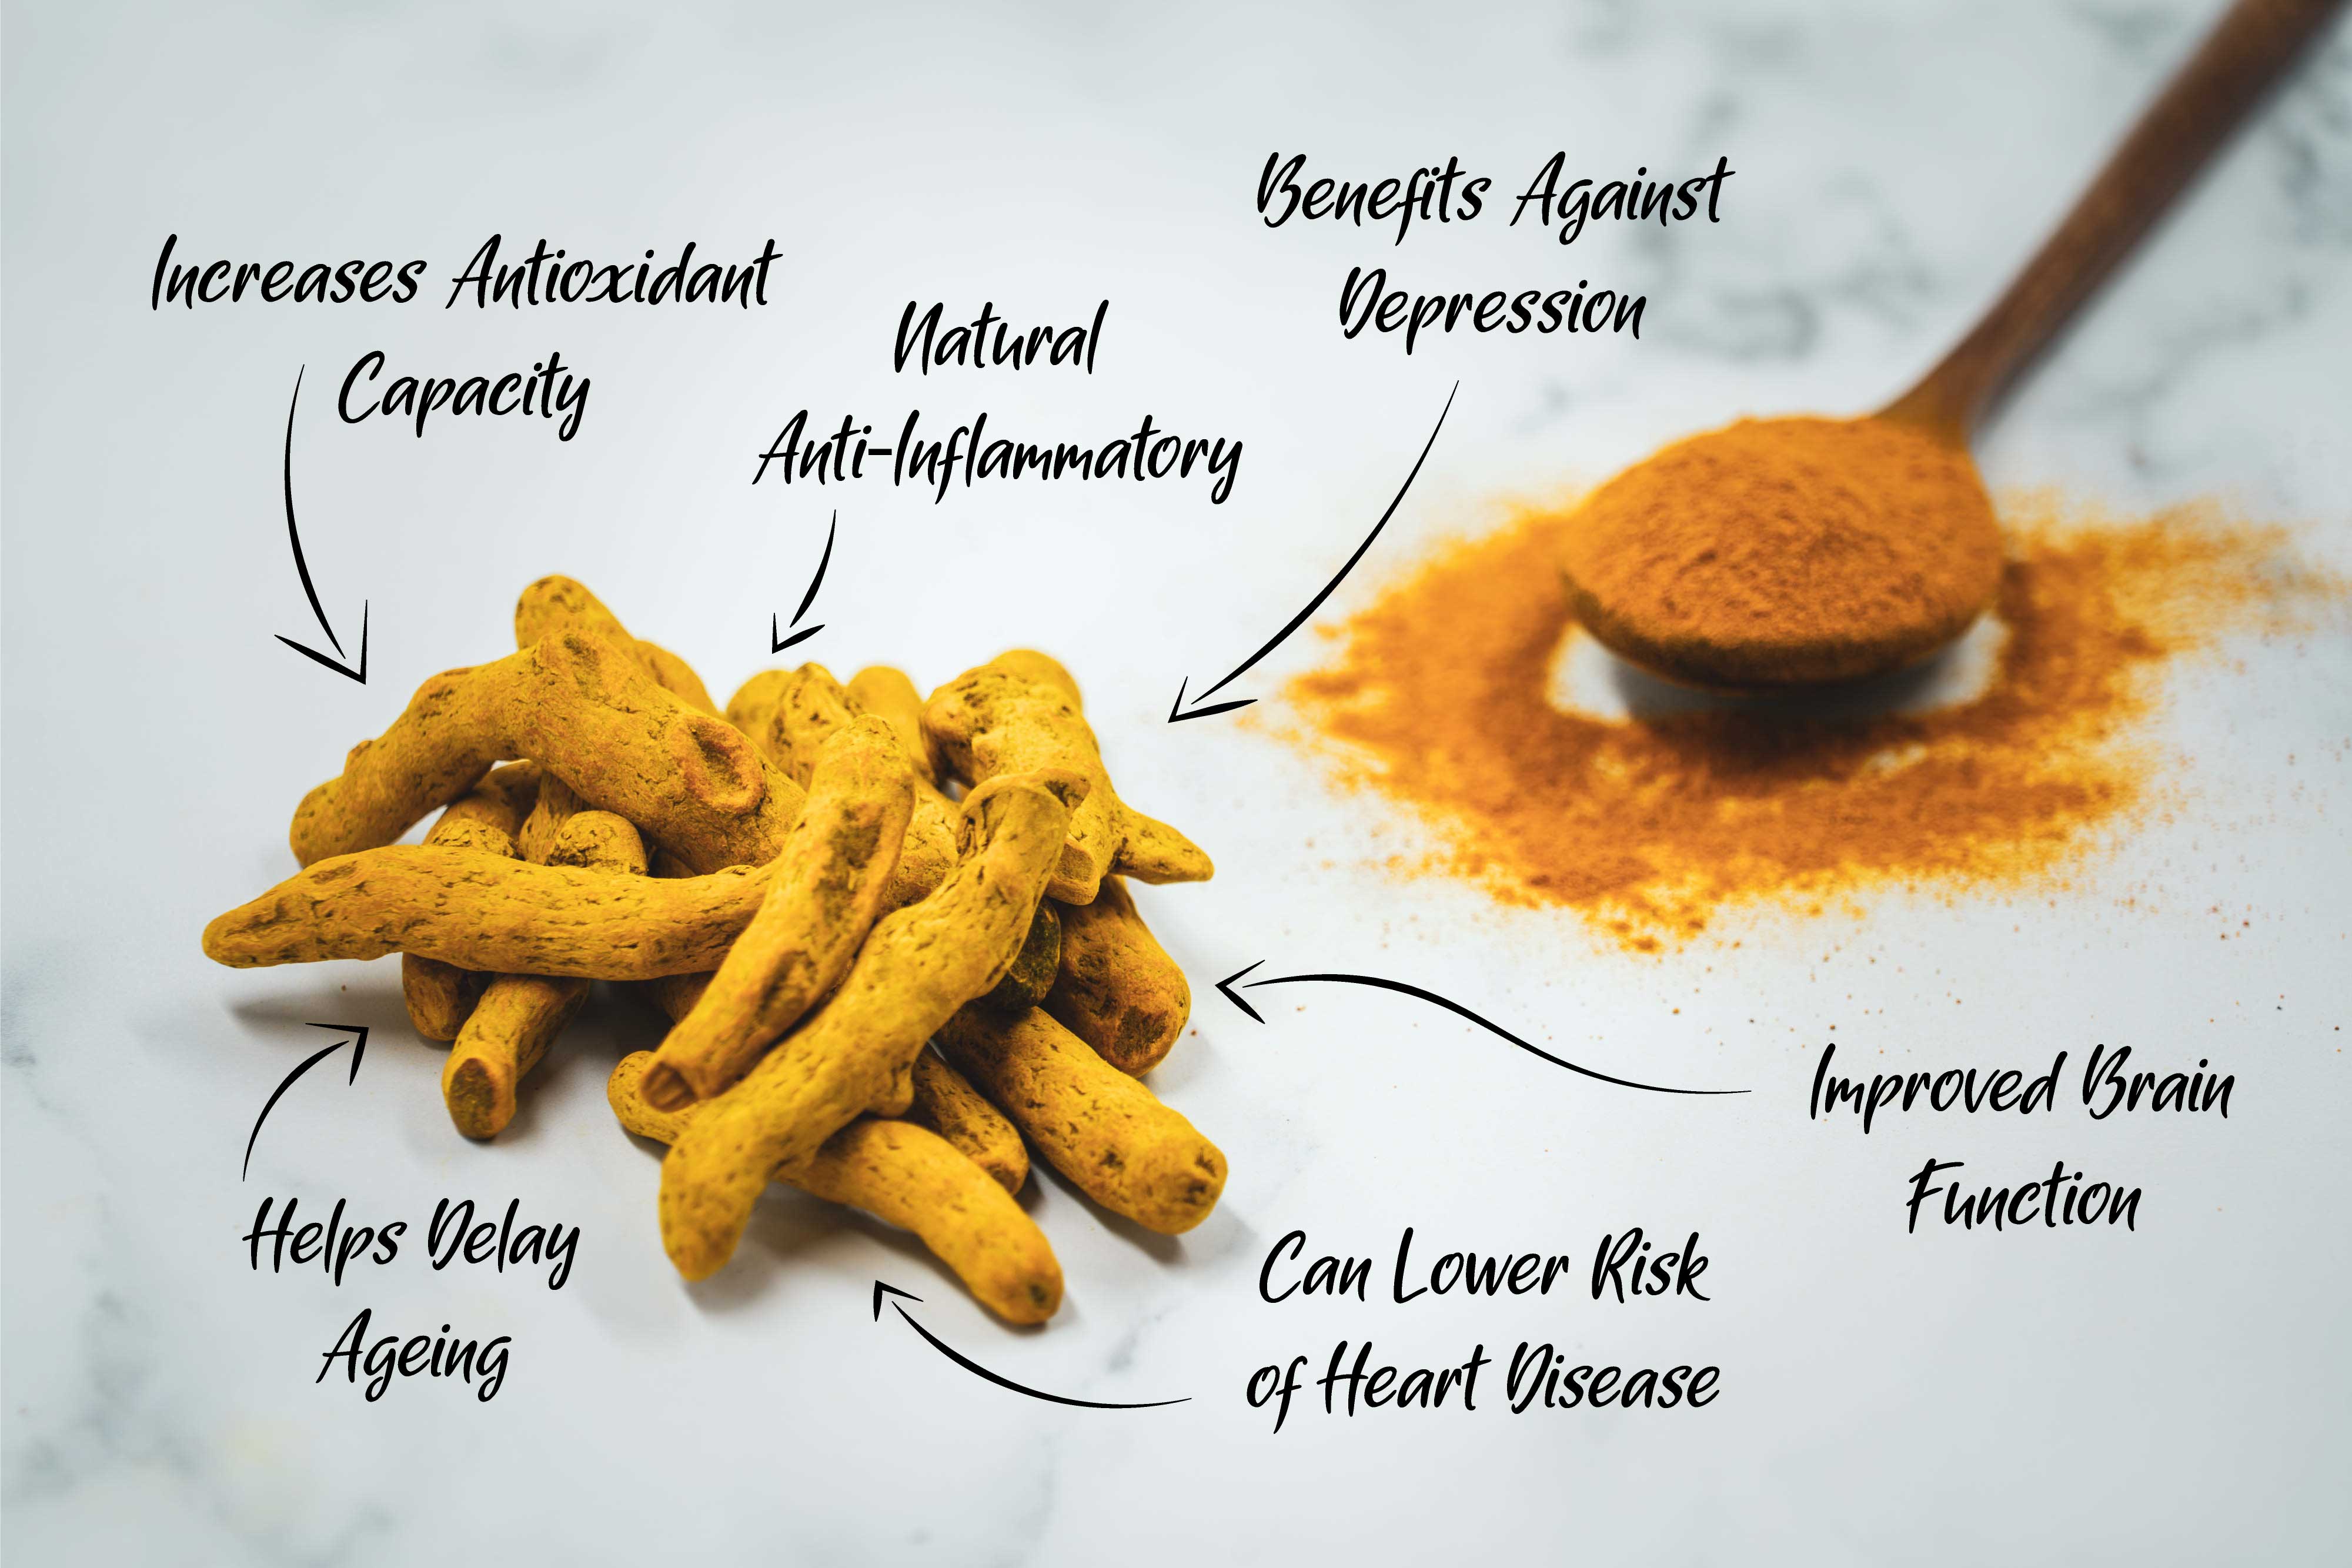 What is Turmeric Curcumin and What are it's Benefits